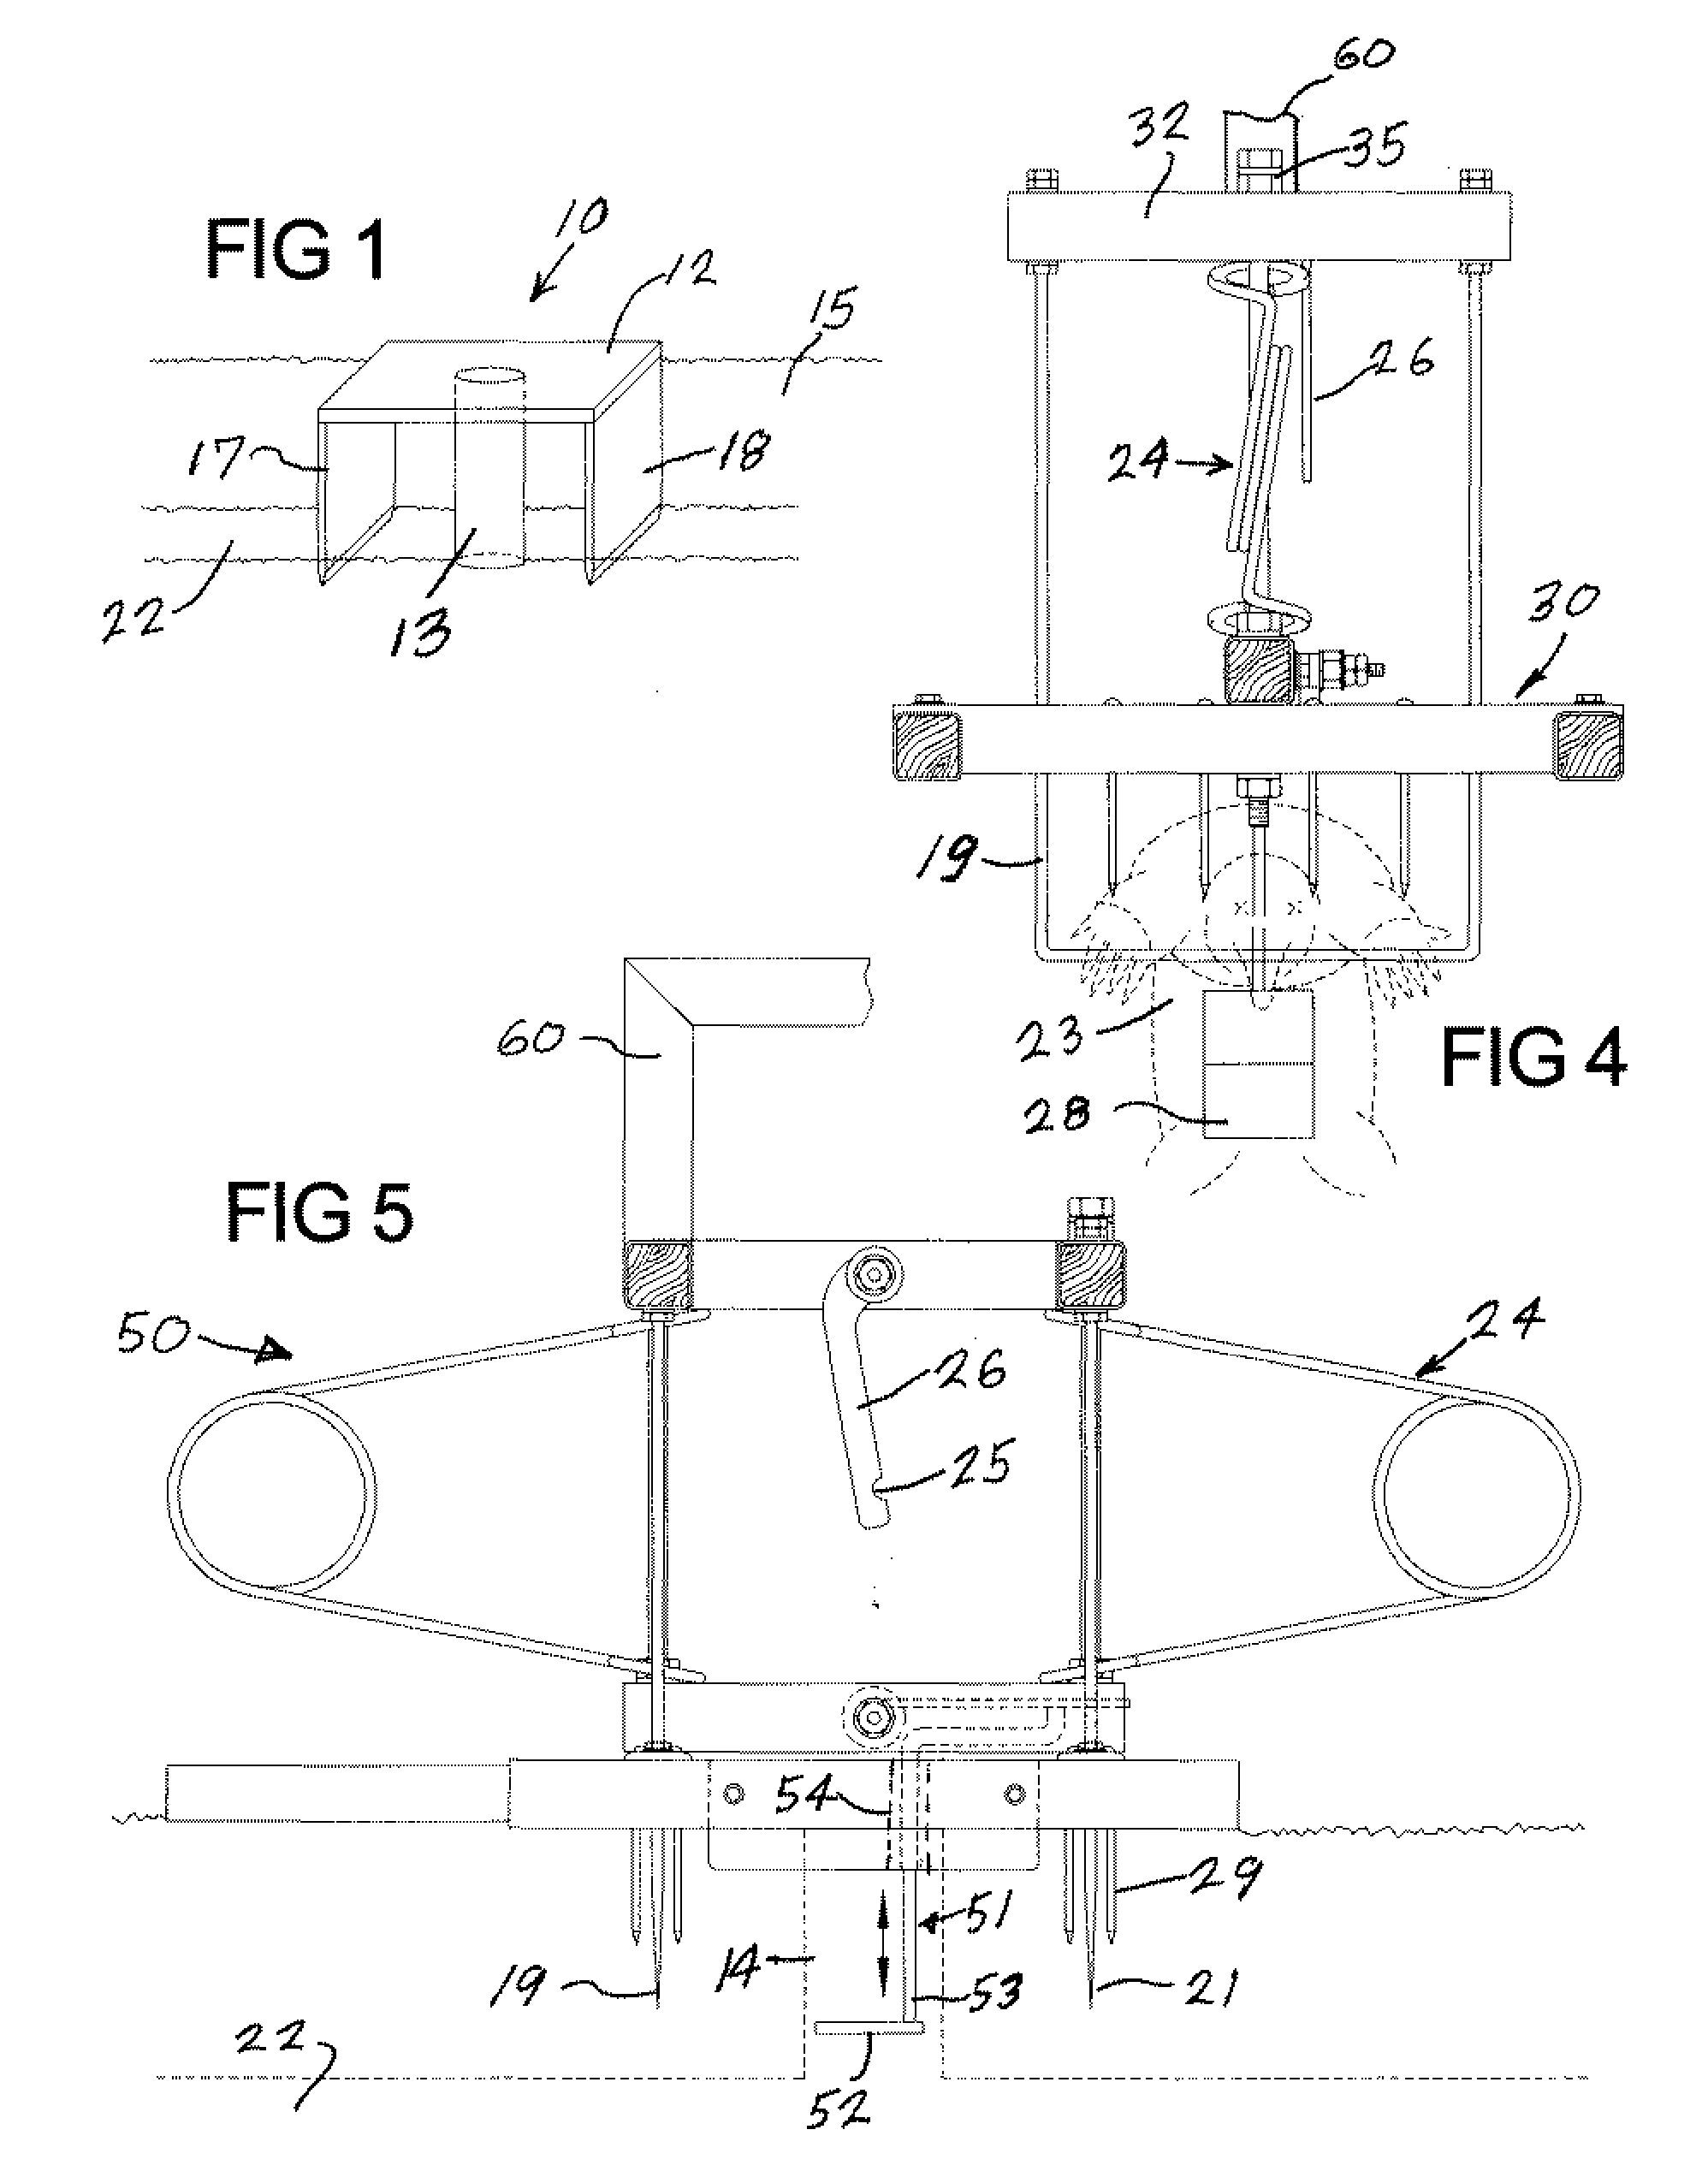 Mole trapping system, mole trap and trap-setting assistance device, and methods of constructing and utilizing same